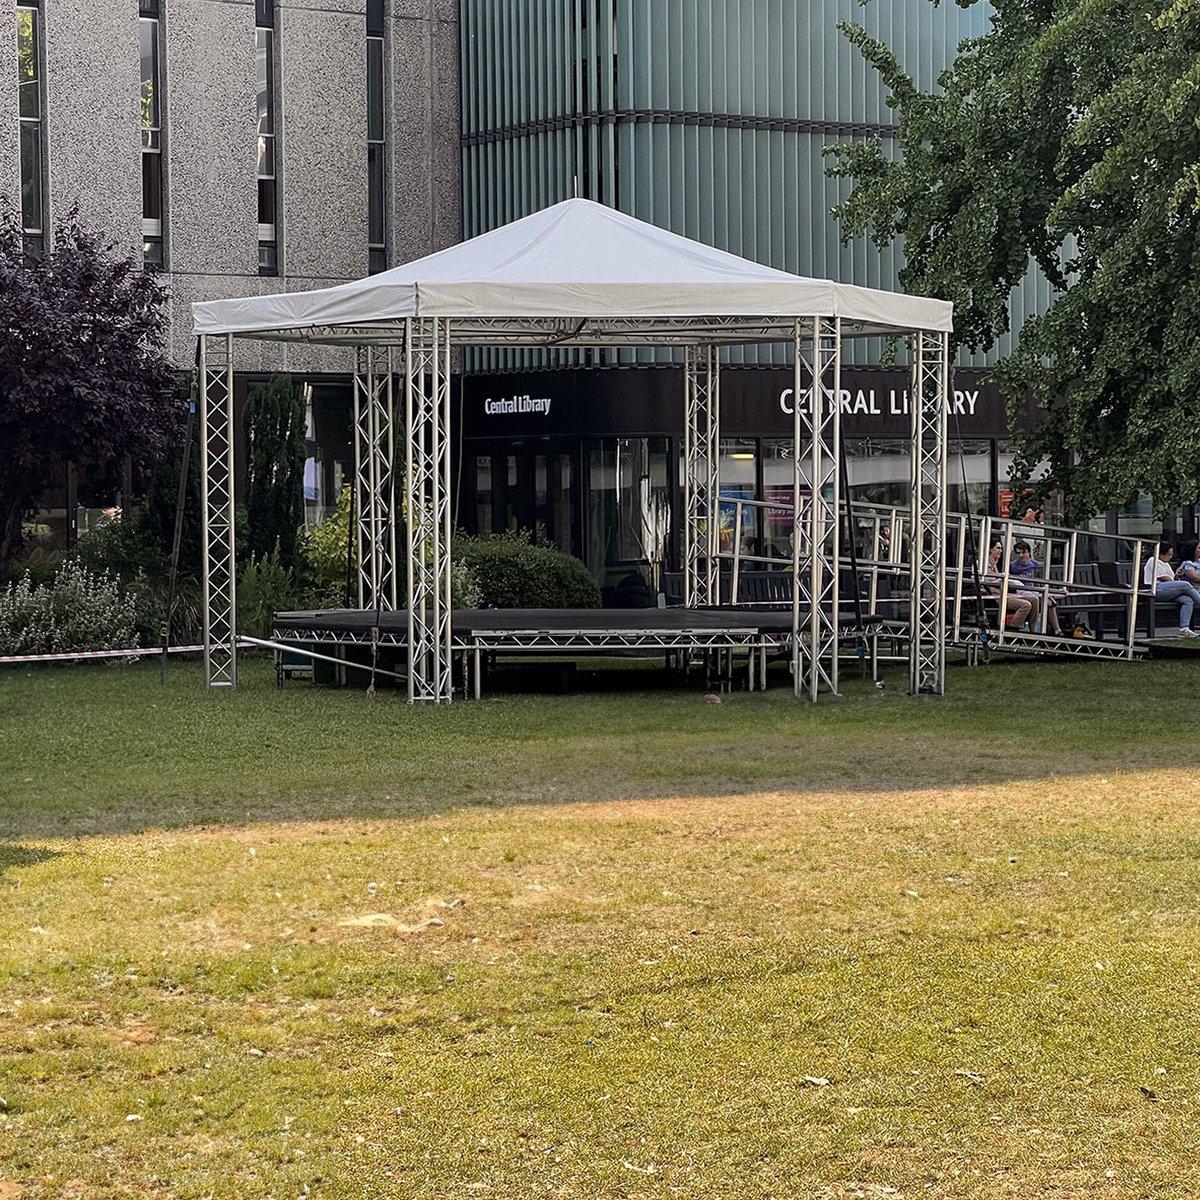 It was great to be back at @imperialcollege earlier this season providing 2 of our outdoor structures for there annual event, Great Exhibition Road Festival, right in the heart of our capital. 🇬🇧☀️

#WeMakeEvents #Stage #London #Summer #SummerEvent #OutdoorStage